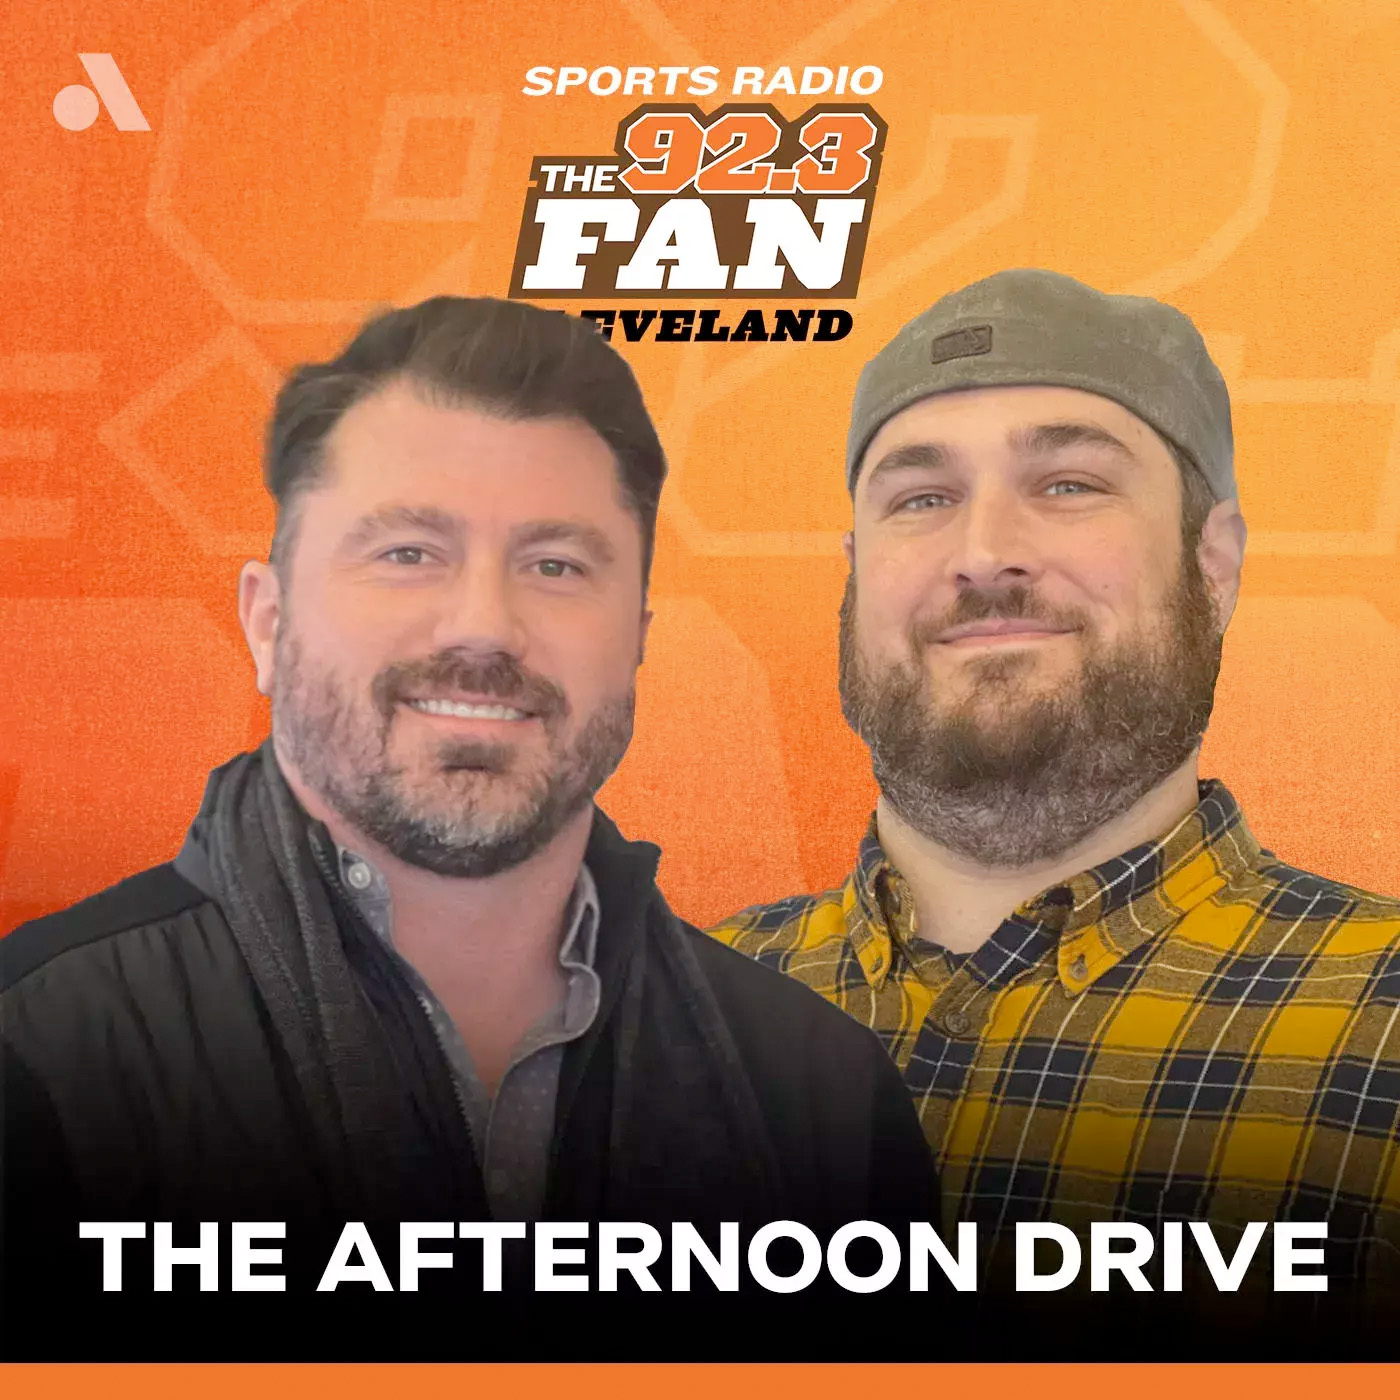 Afternoon Drive reacts to Browns' hire of Mike Vrabel as consultant